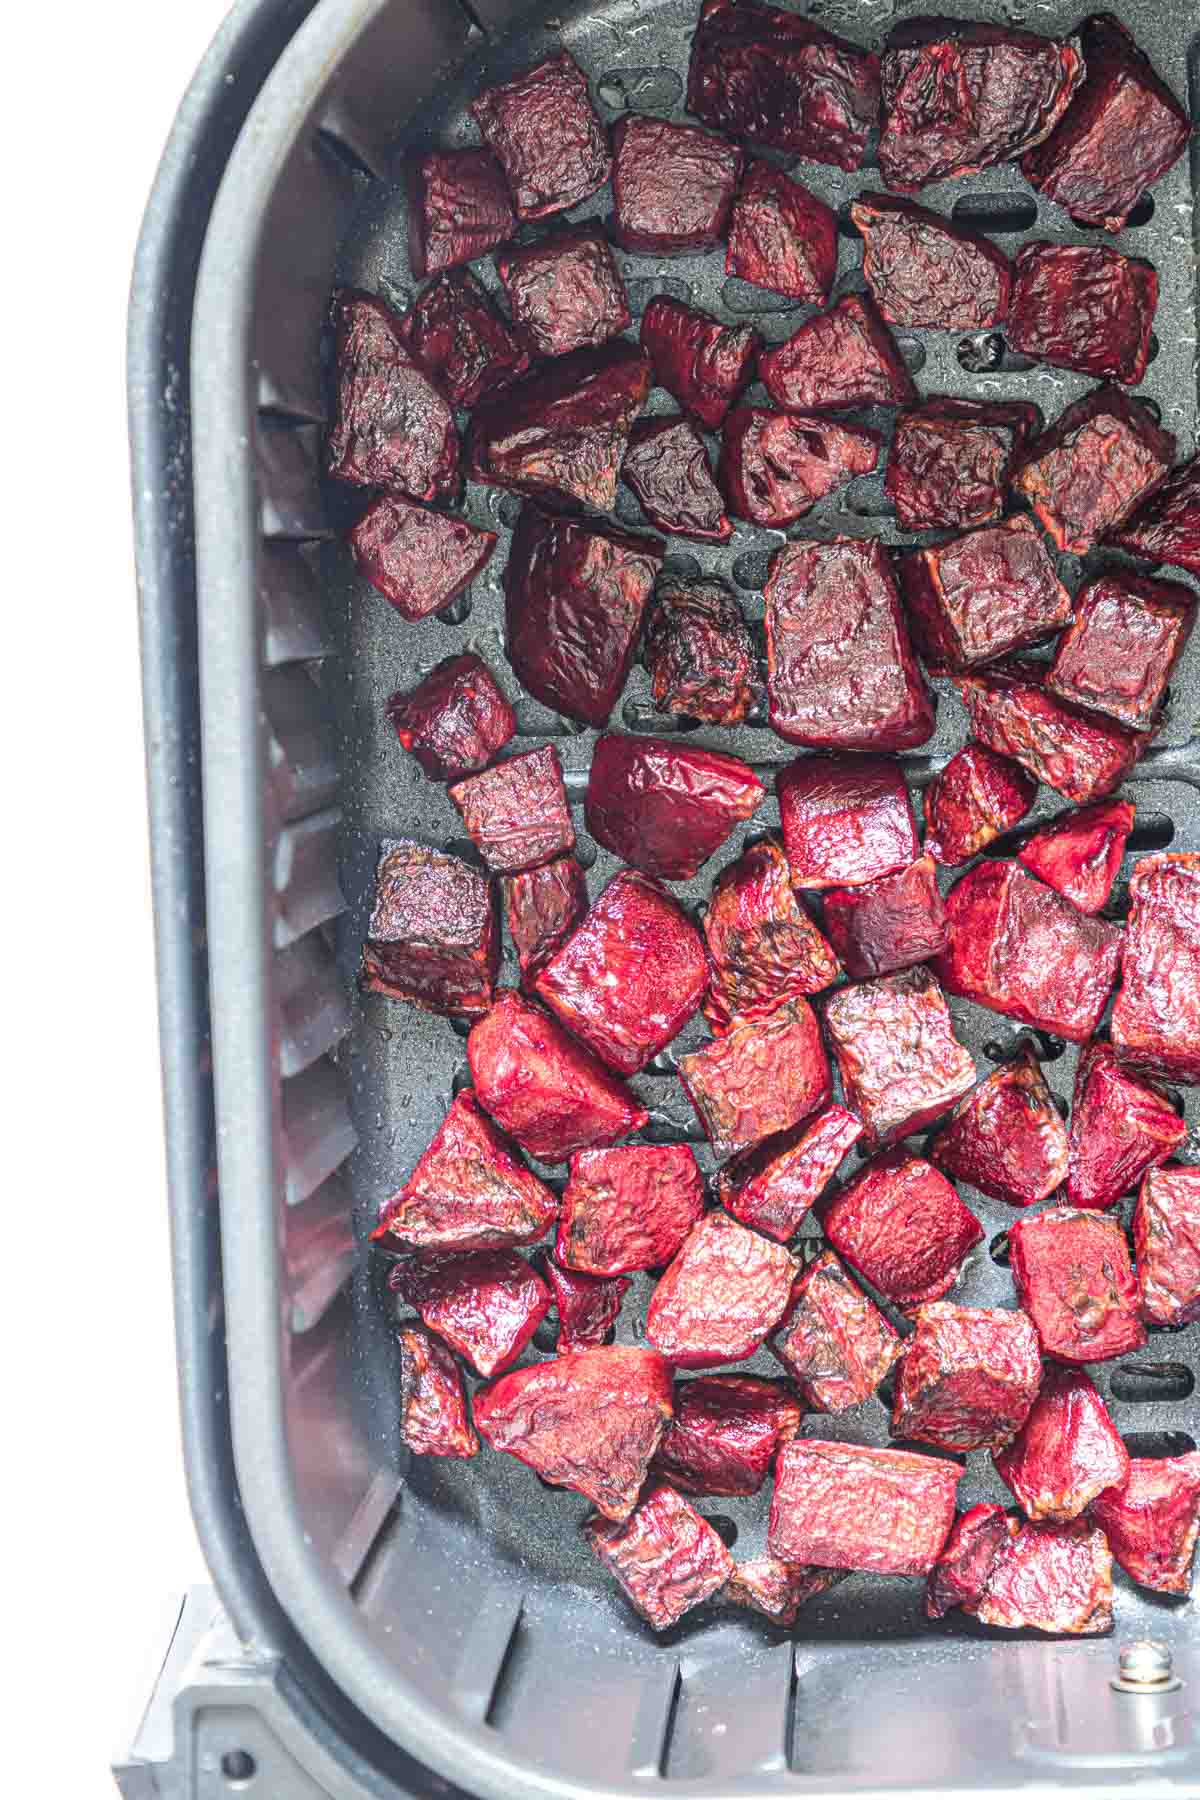 close up view of the finished air fryer beets inside the air fryer basket